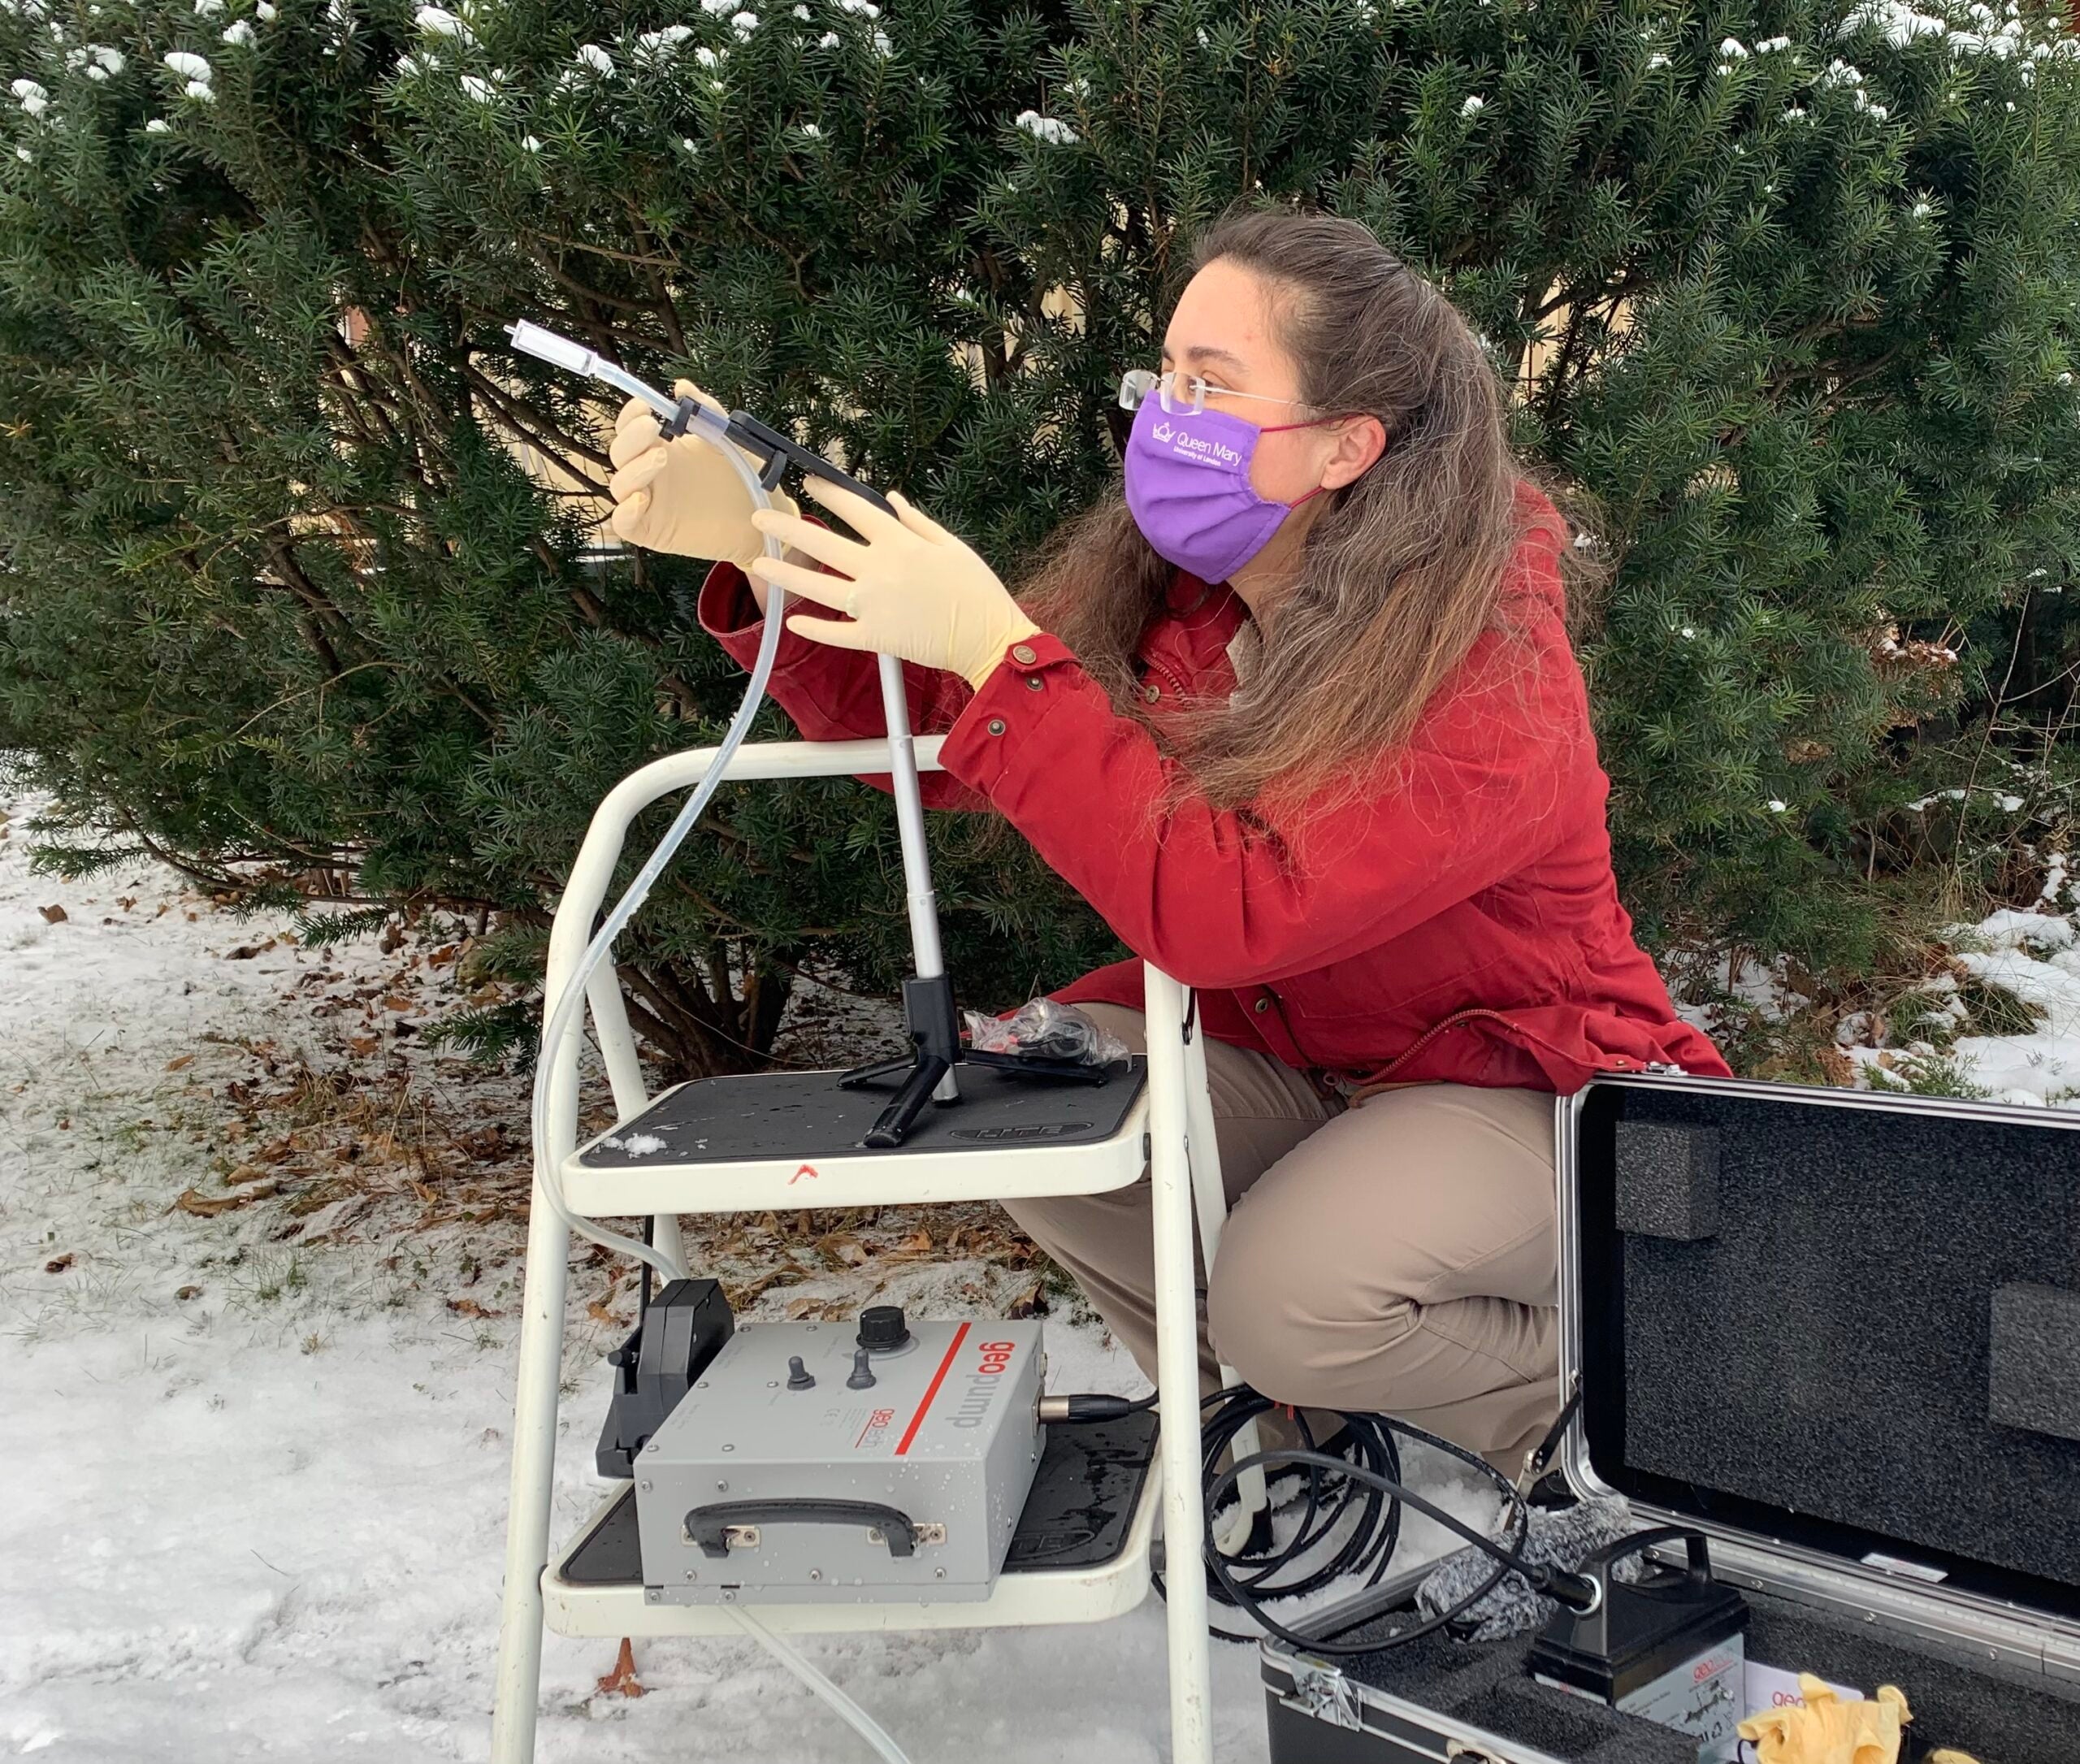 a woman in a purple face mask, gloves, and red jacket holds a piece of air collection equipment, which has a long tube feature. she is kneeling down next to a stool where the equipment is perched. behind her is a large green bush